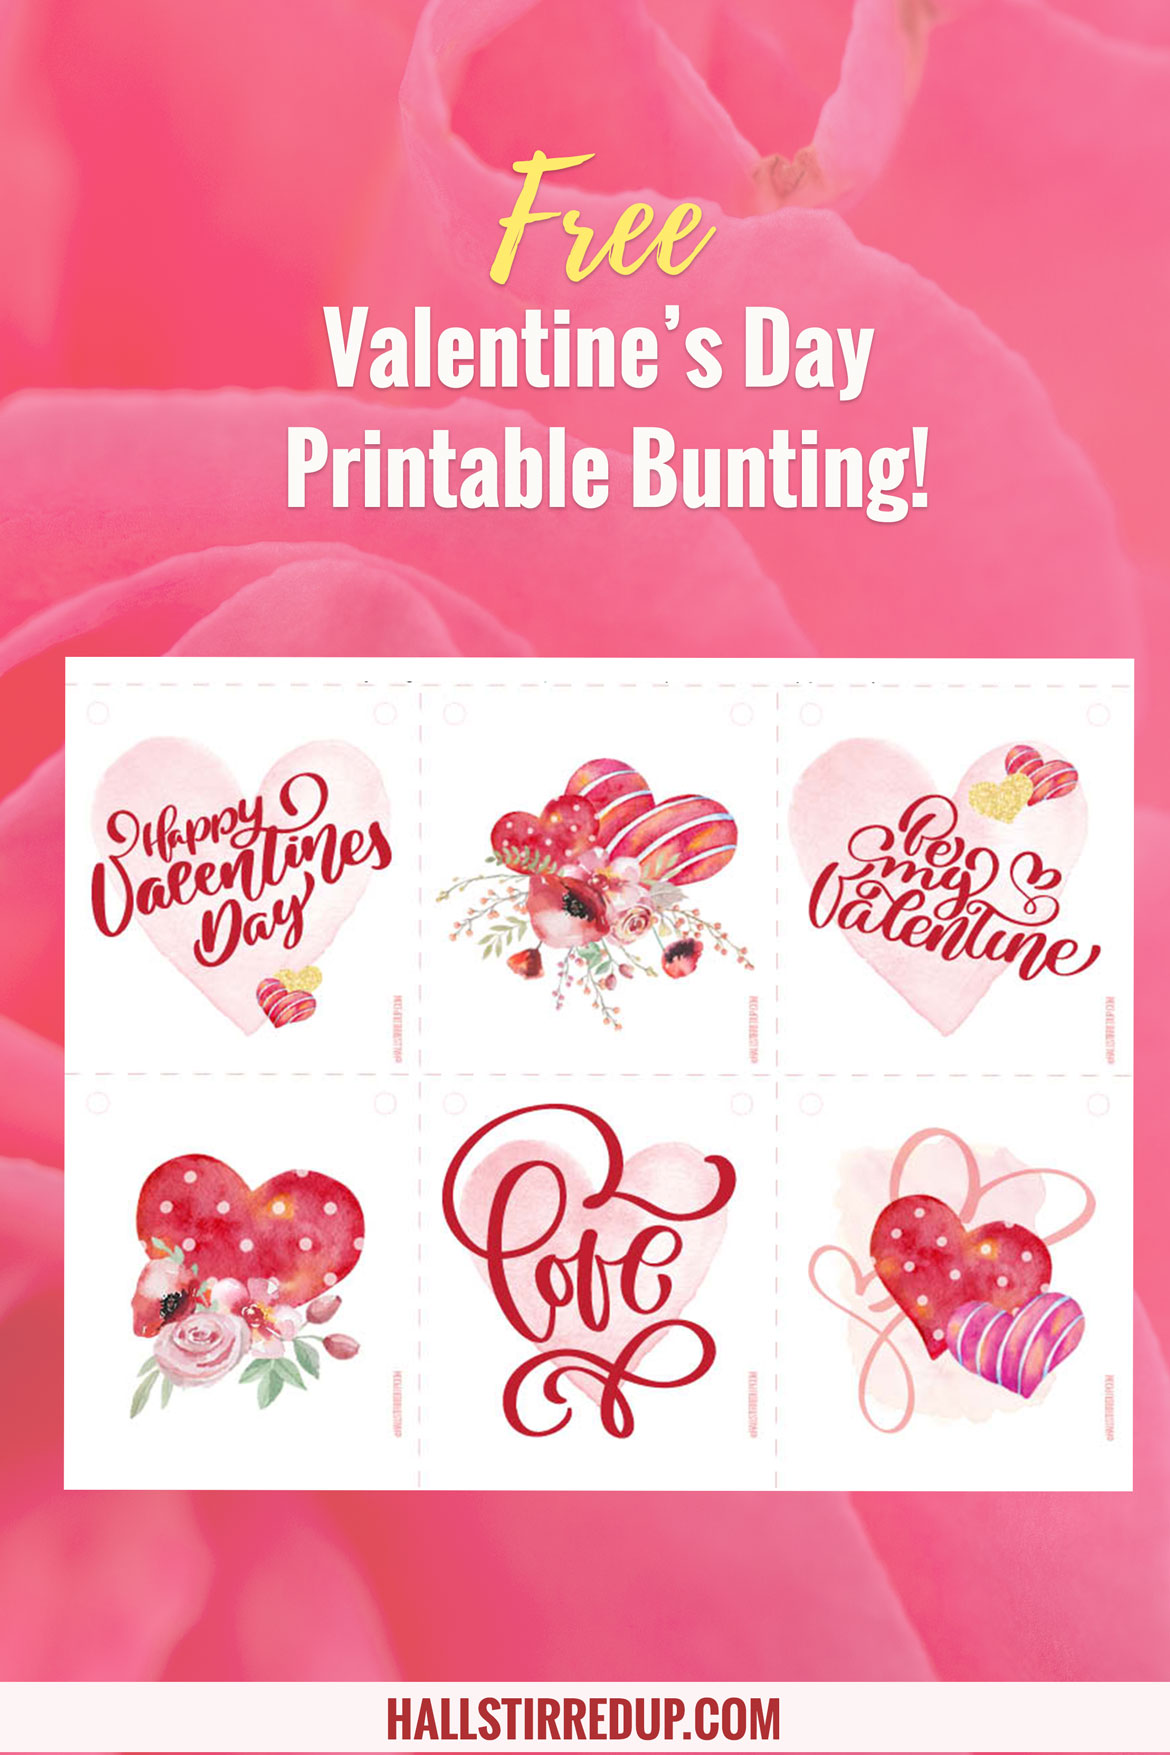 Celebrate Valentine's Day with a fun printable bunting